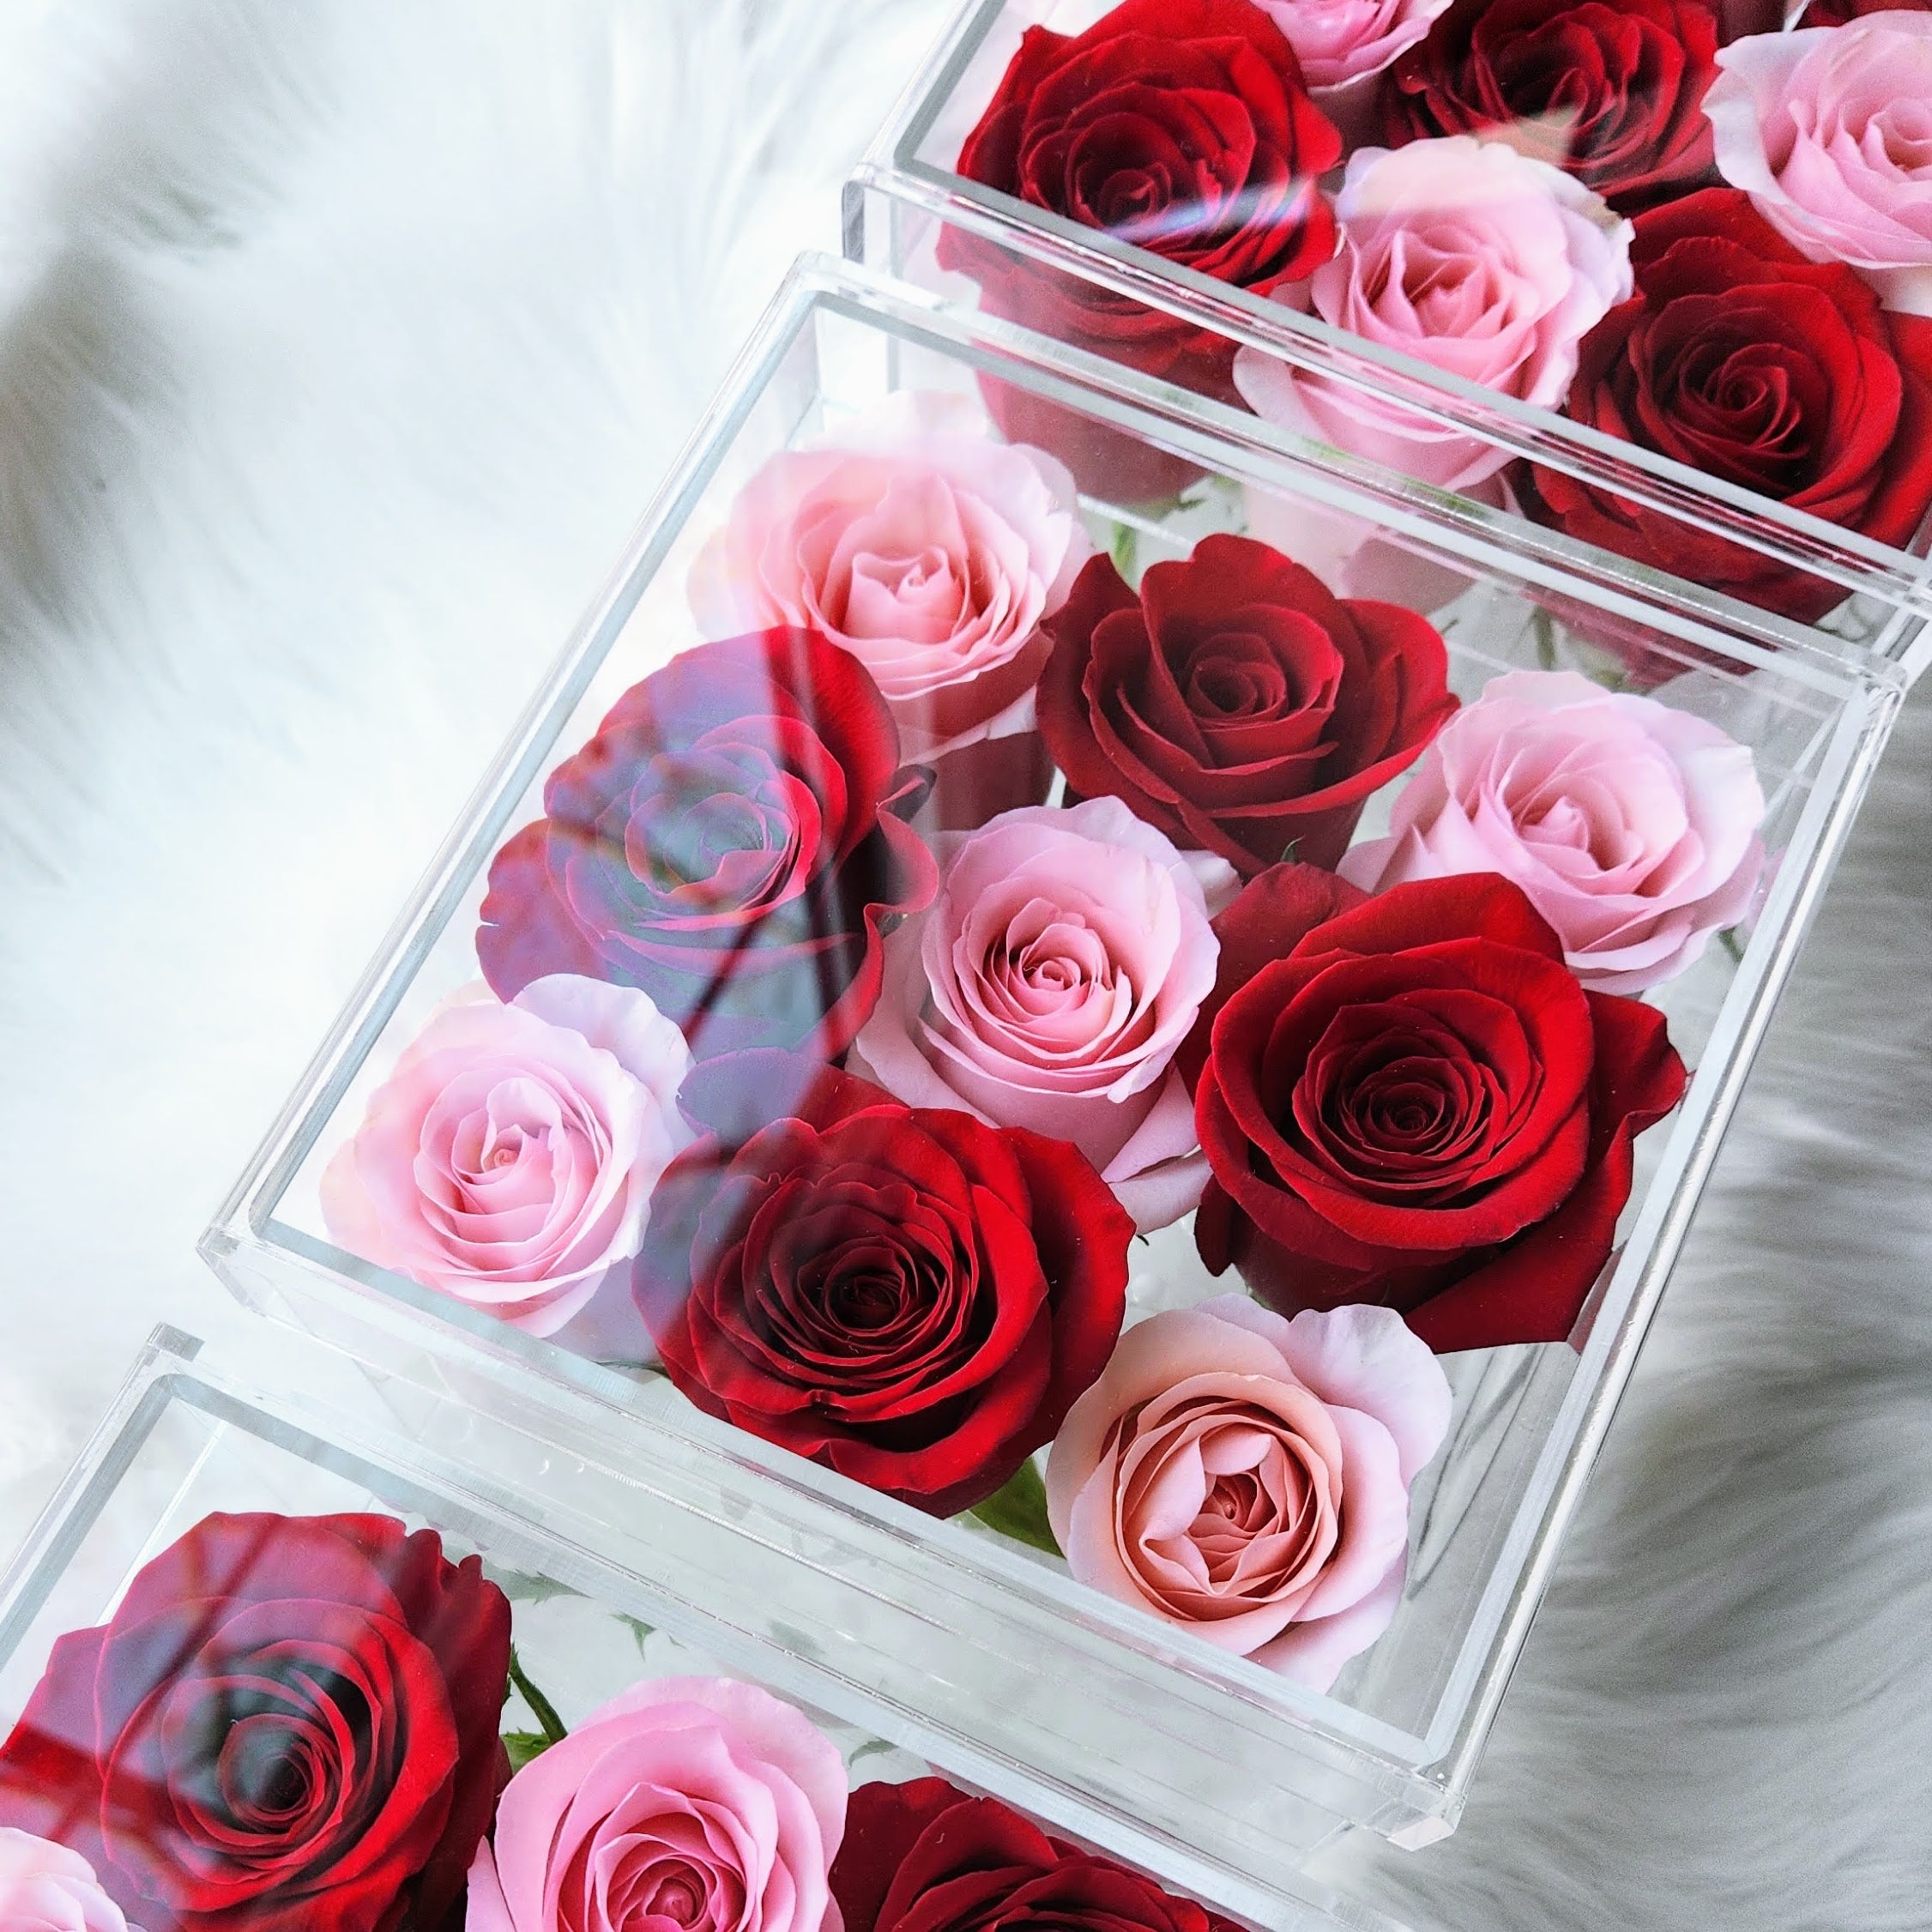 Petite Box of Fresh-Cut Roses for Delivery in the Sarasota, FL Area